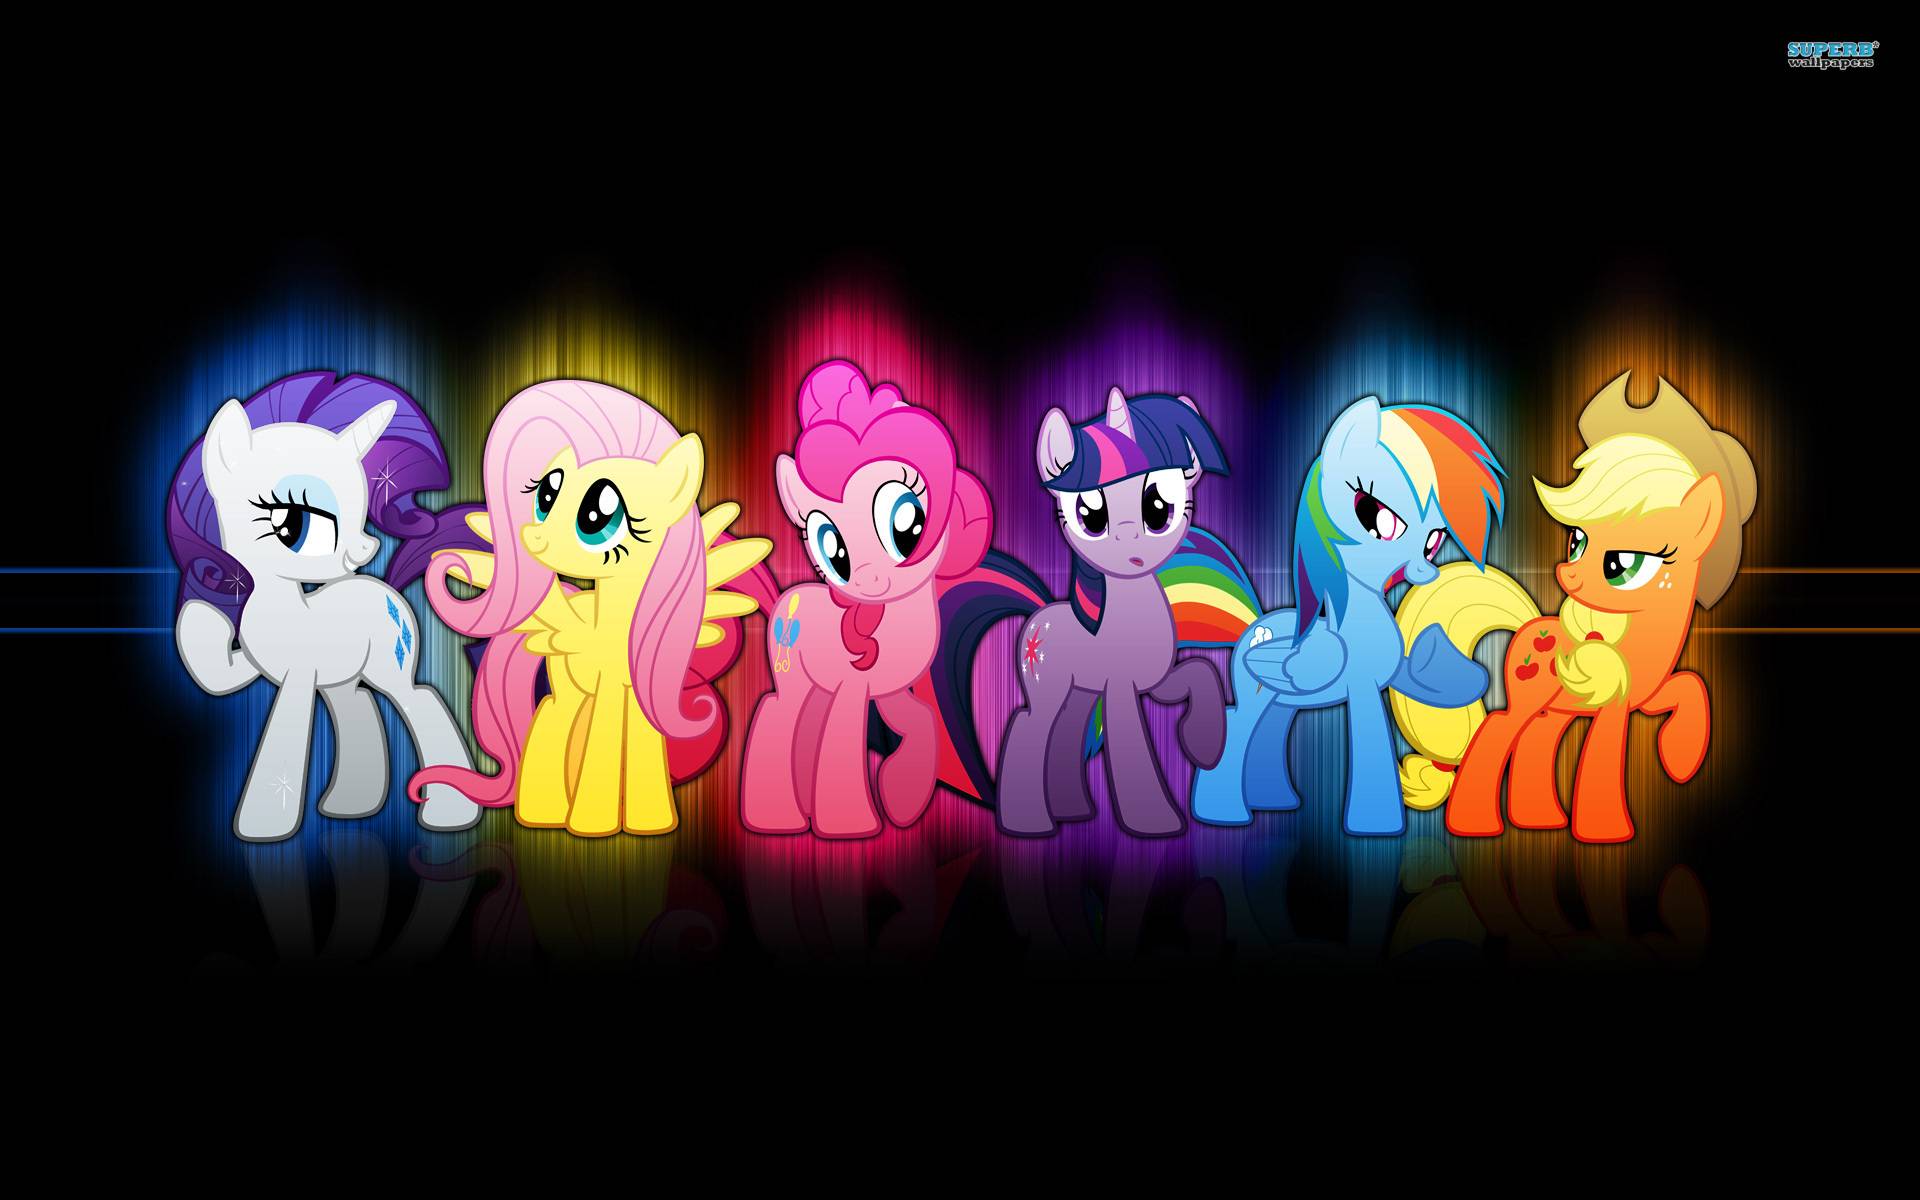 Neon Wallpaper Cool With The Main Ponies